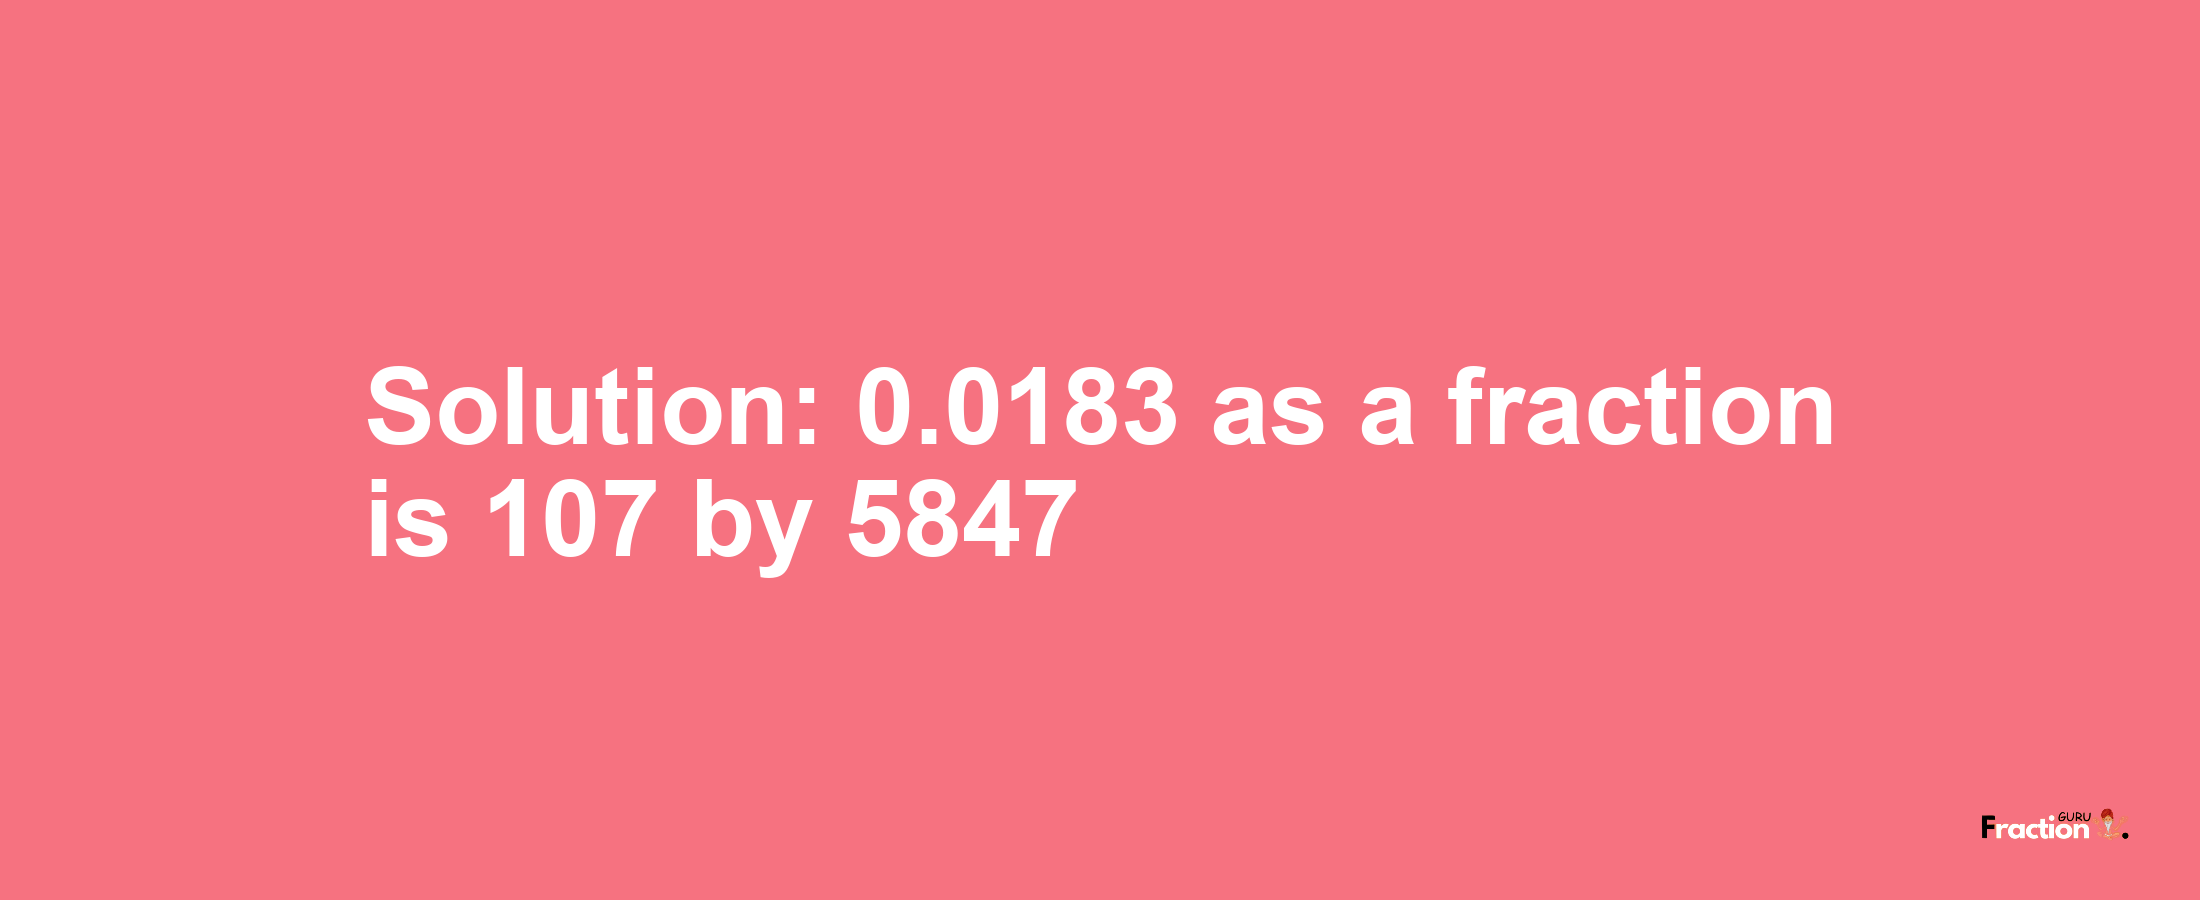 Solution:0.0183 as a fraction is 107/5847